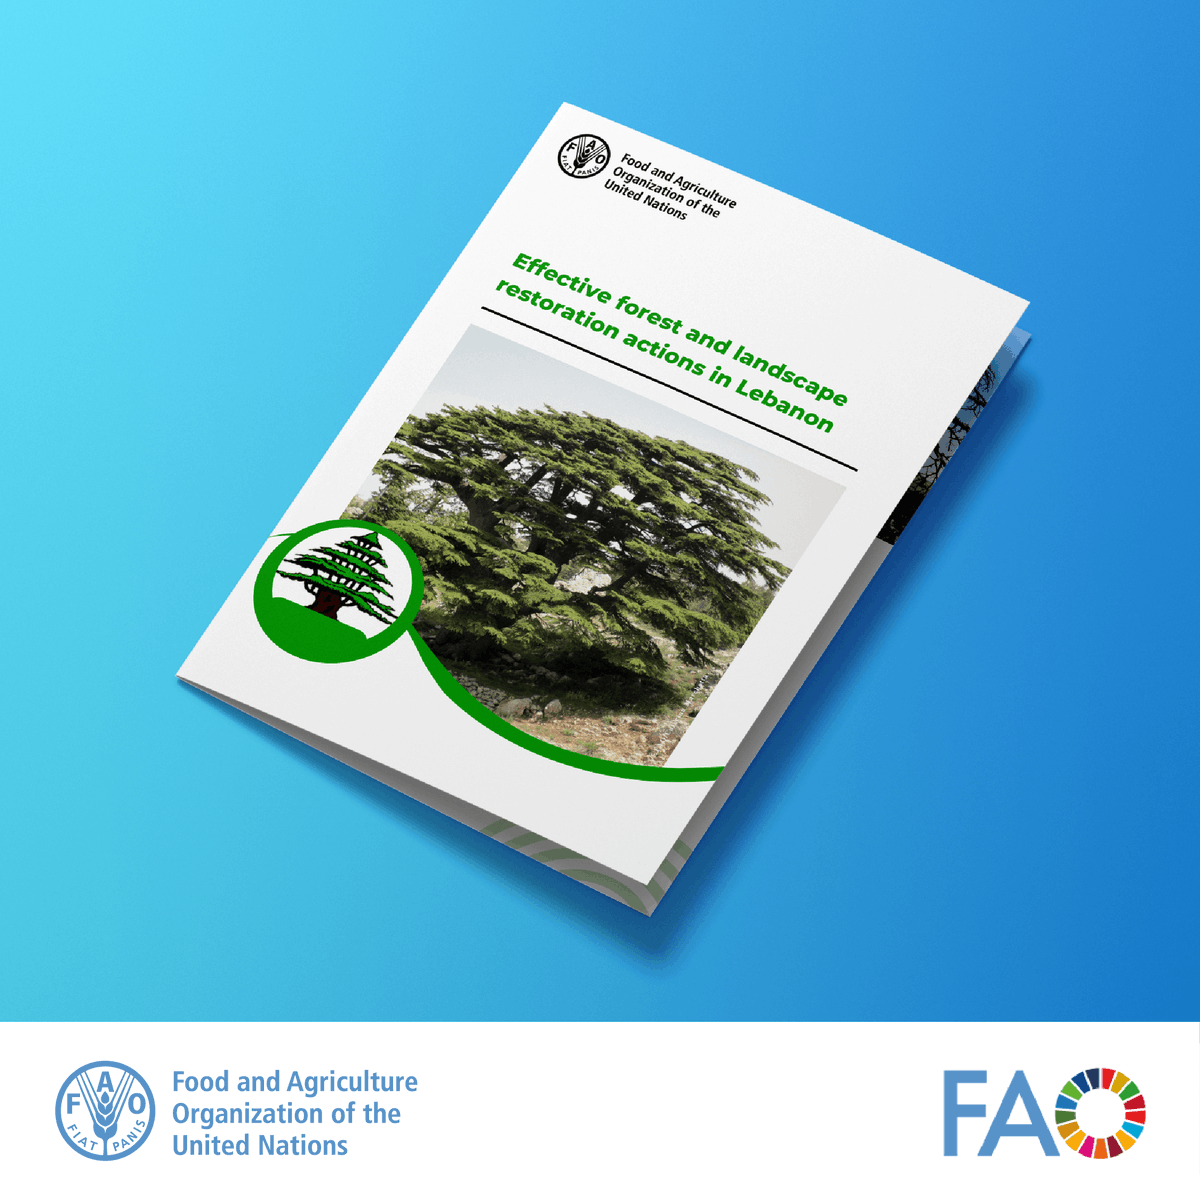 Download a new free @FAO publication Effective forest and landscape restoration actions in Lebanon: A cross-sectoral collaboration between FAO, #Lebanon and #Korea bit.ly/4aWmppI #FLRM #GenerationRestoration @FAOLebanon @FAOinNENA_En @FAOROK